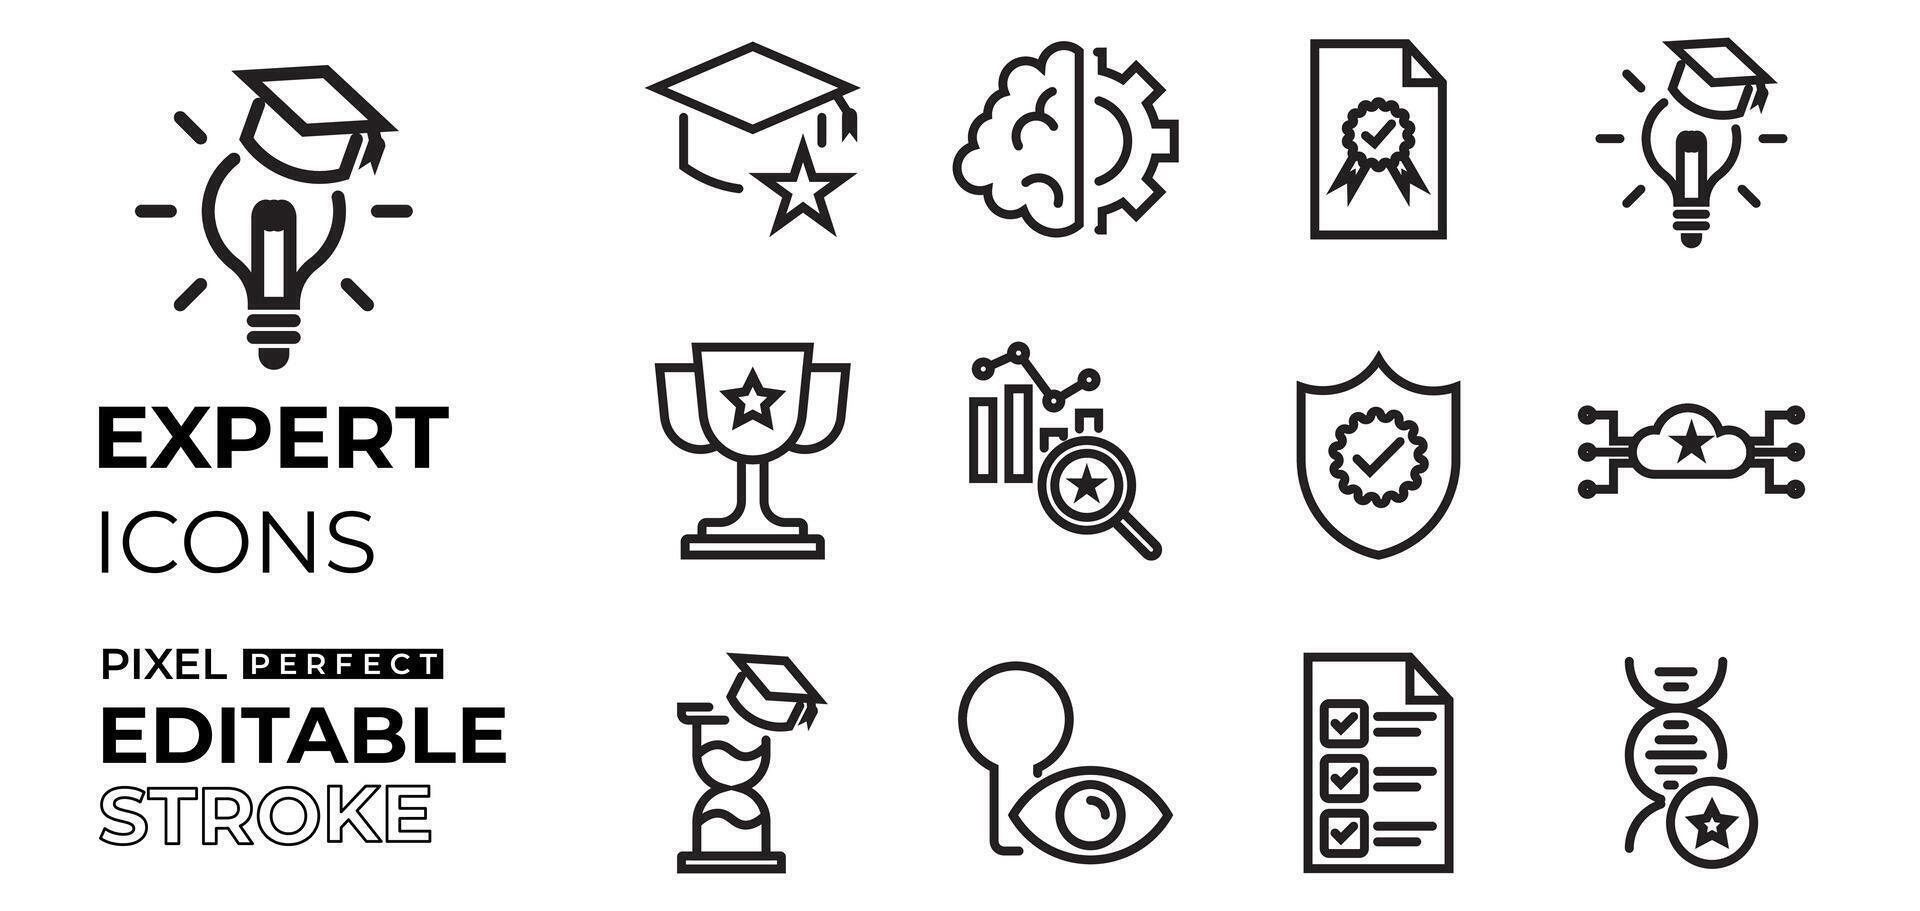 business expert icons set with knowledge, brain, talent, ideas, winner, analytics, secured, process, protect, time management with editable stroke vector